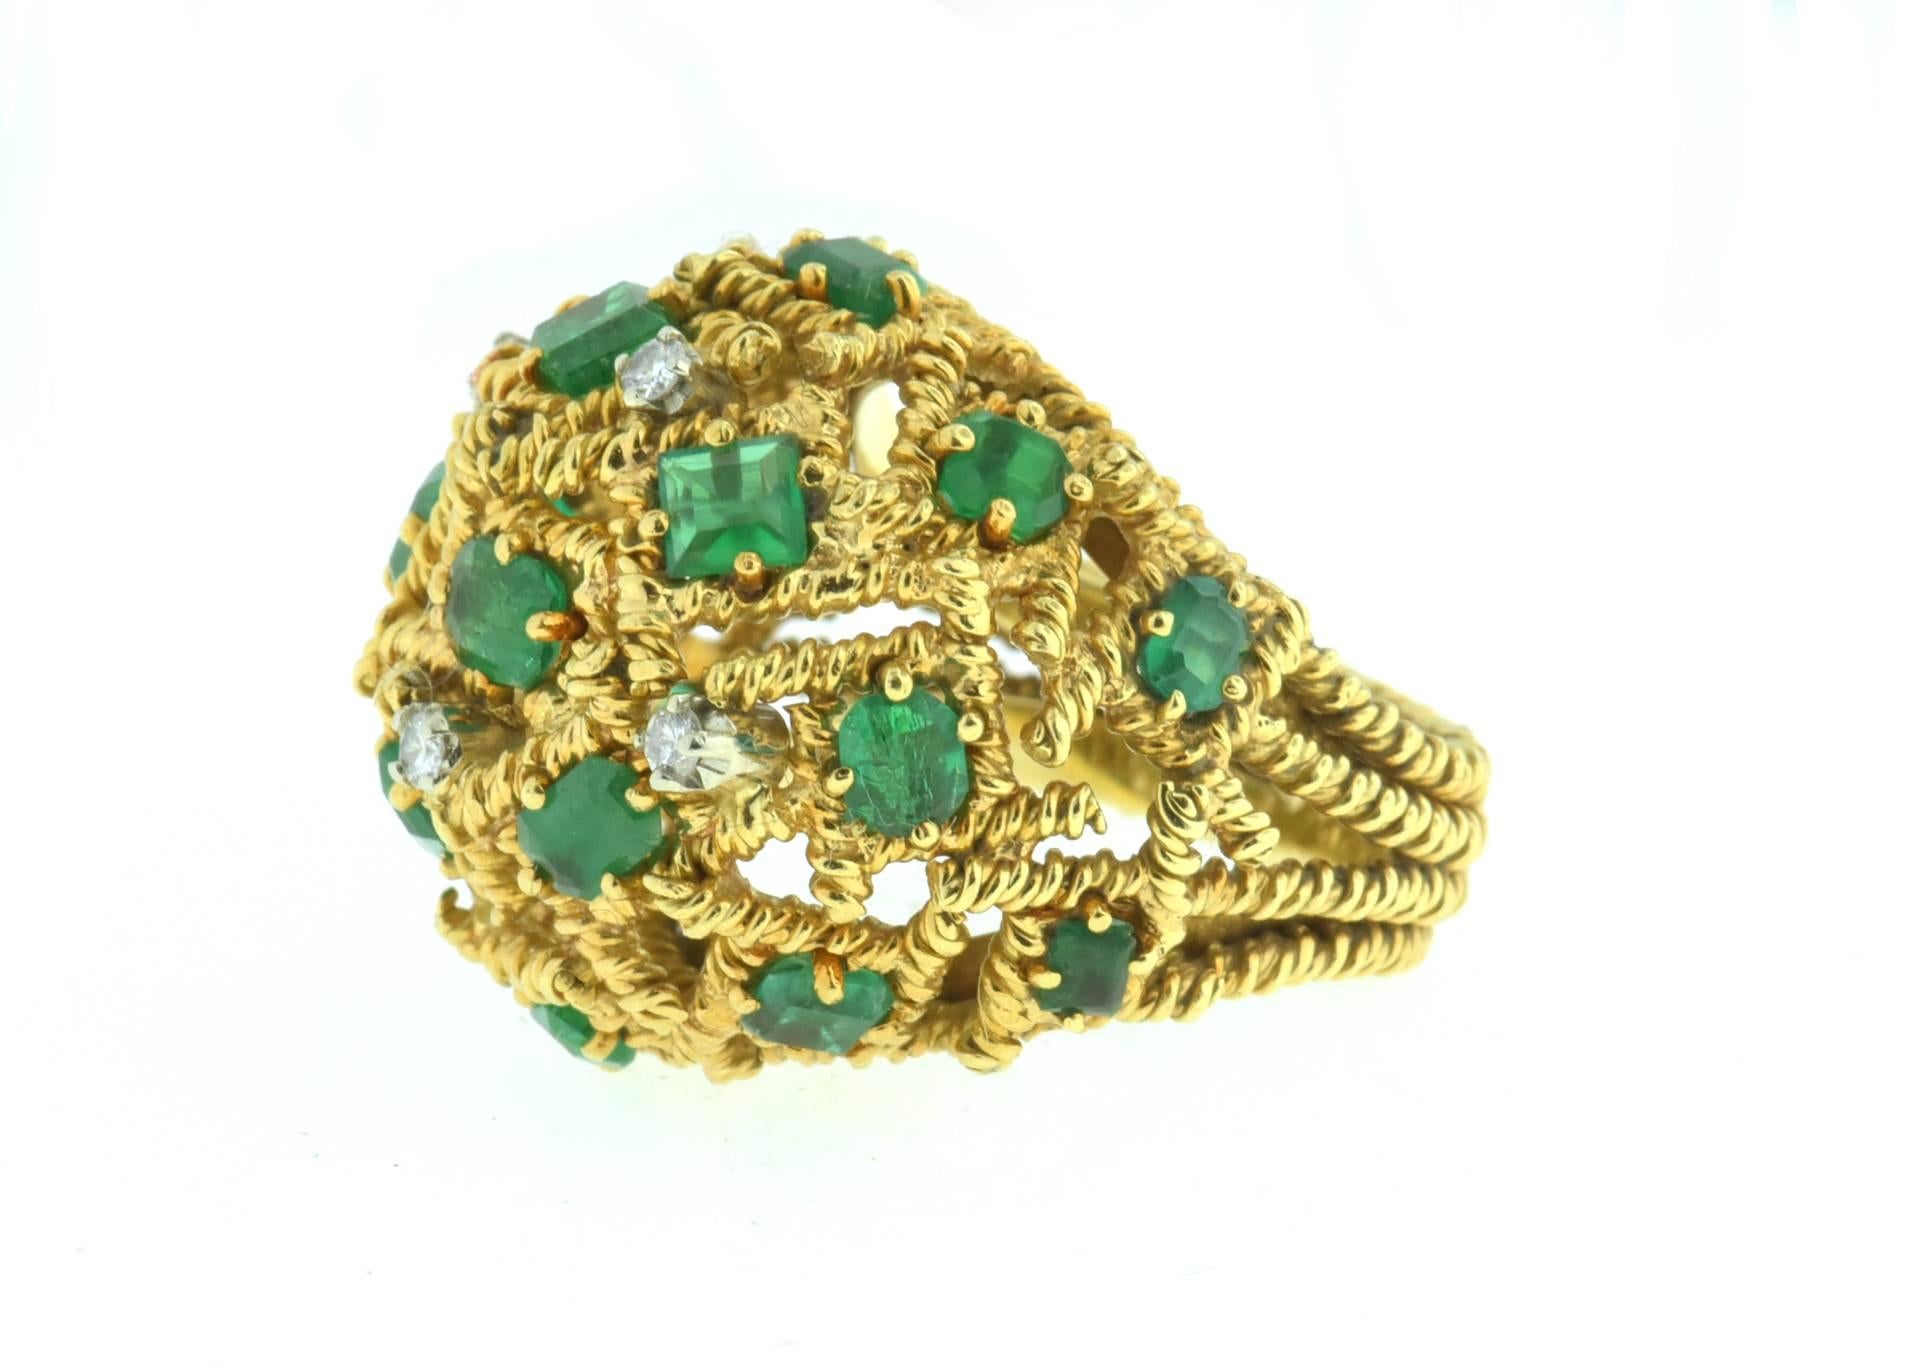 Fabulous Mid Century Modernist Italian Emerald, Diamond and Gold Dome Ring in 18K Yellow Gold, ring is set with various shapes and sizes of step cut emeralds in a perfect green color as well as 4 elegantly placed round diamonds. Currently fits a